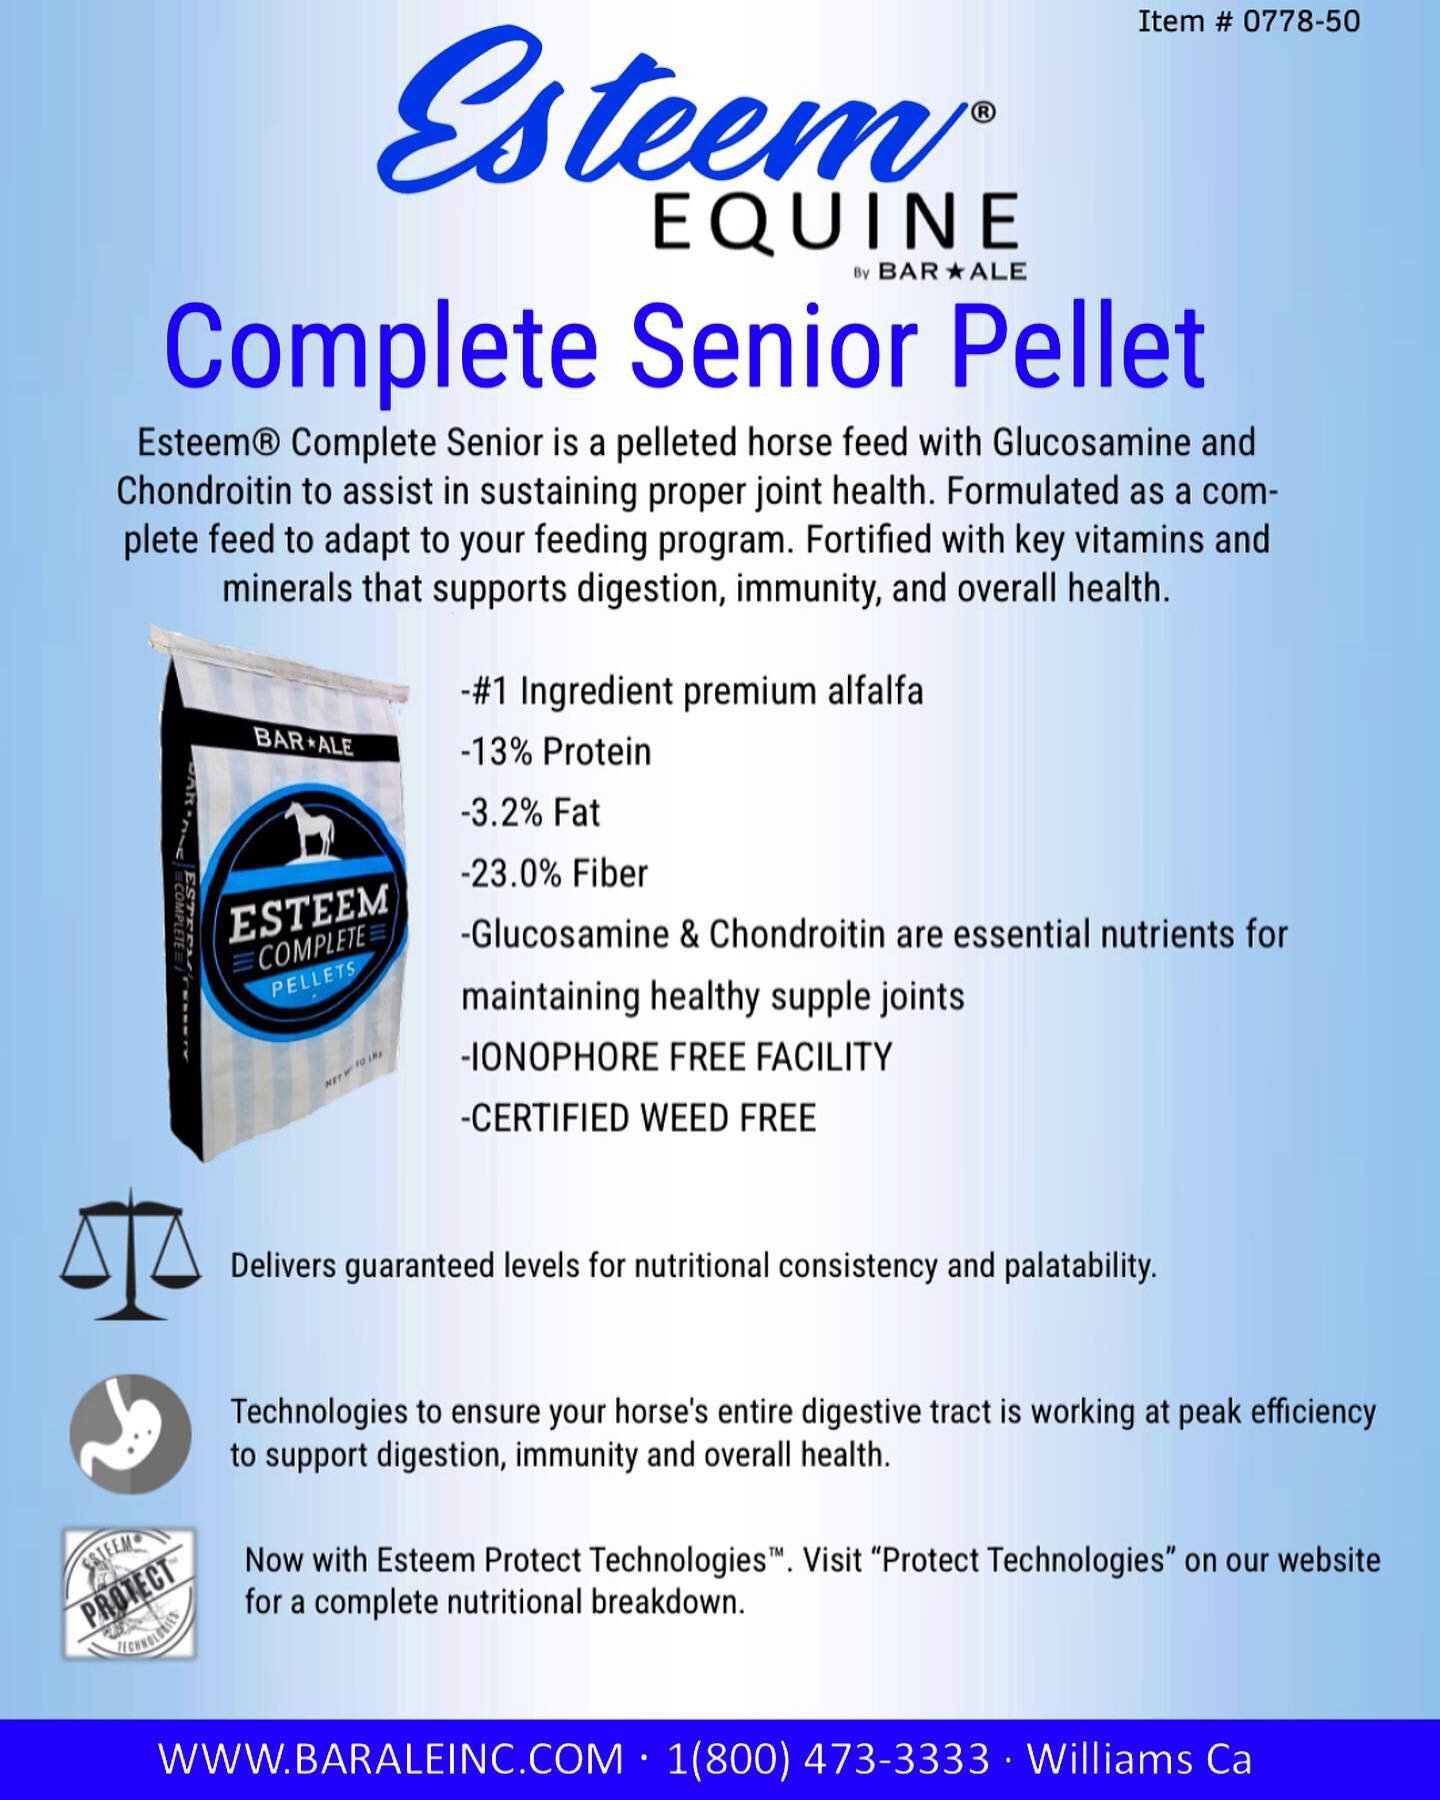 Esteem&reg; Complete Senior Pellet has the same quality ingredients as Esteem&reg; Complete, but with added Glucosamine &amp; Chondroitin to help keep your horses feeling young and agile long into their golden years. 
Call your local feed store to pi